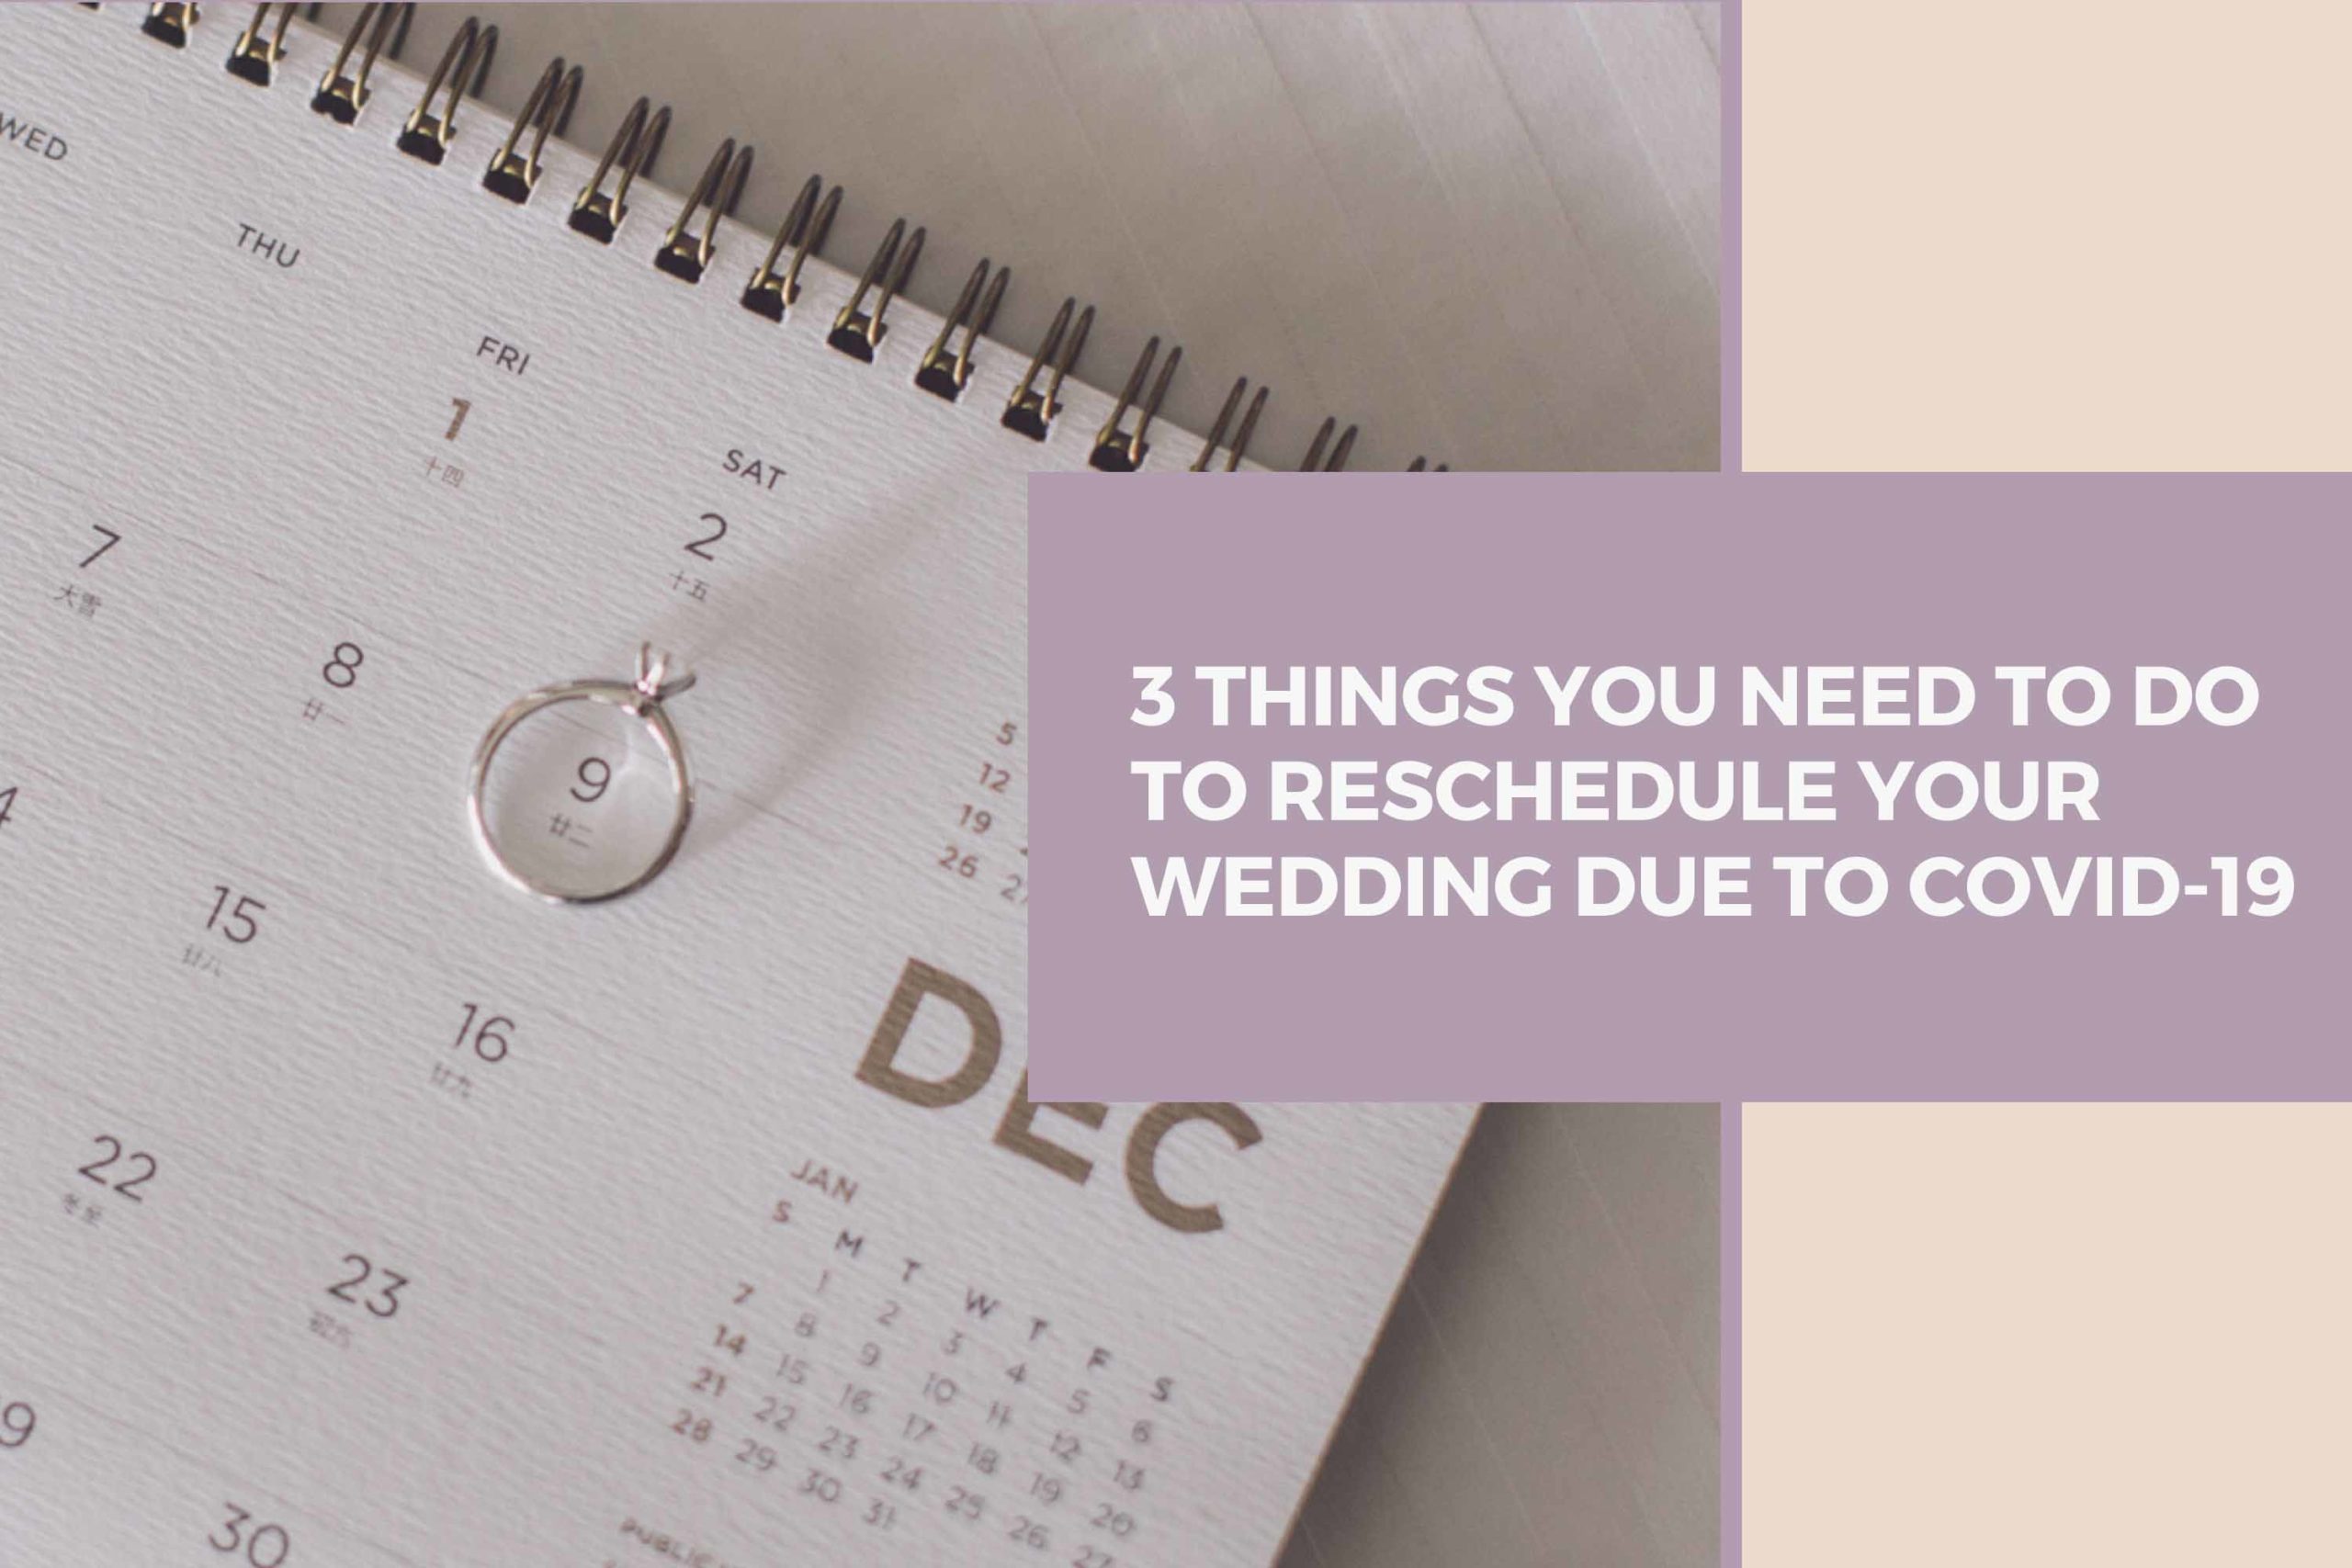 3 Things You Need To Do To Reschedule Your Wedding Due To Covid-19